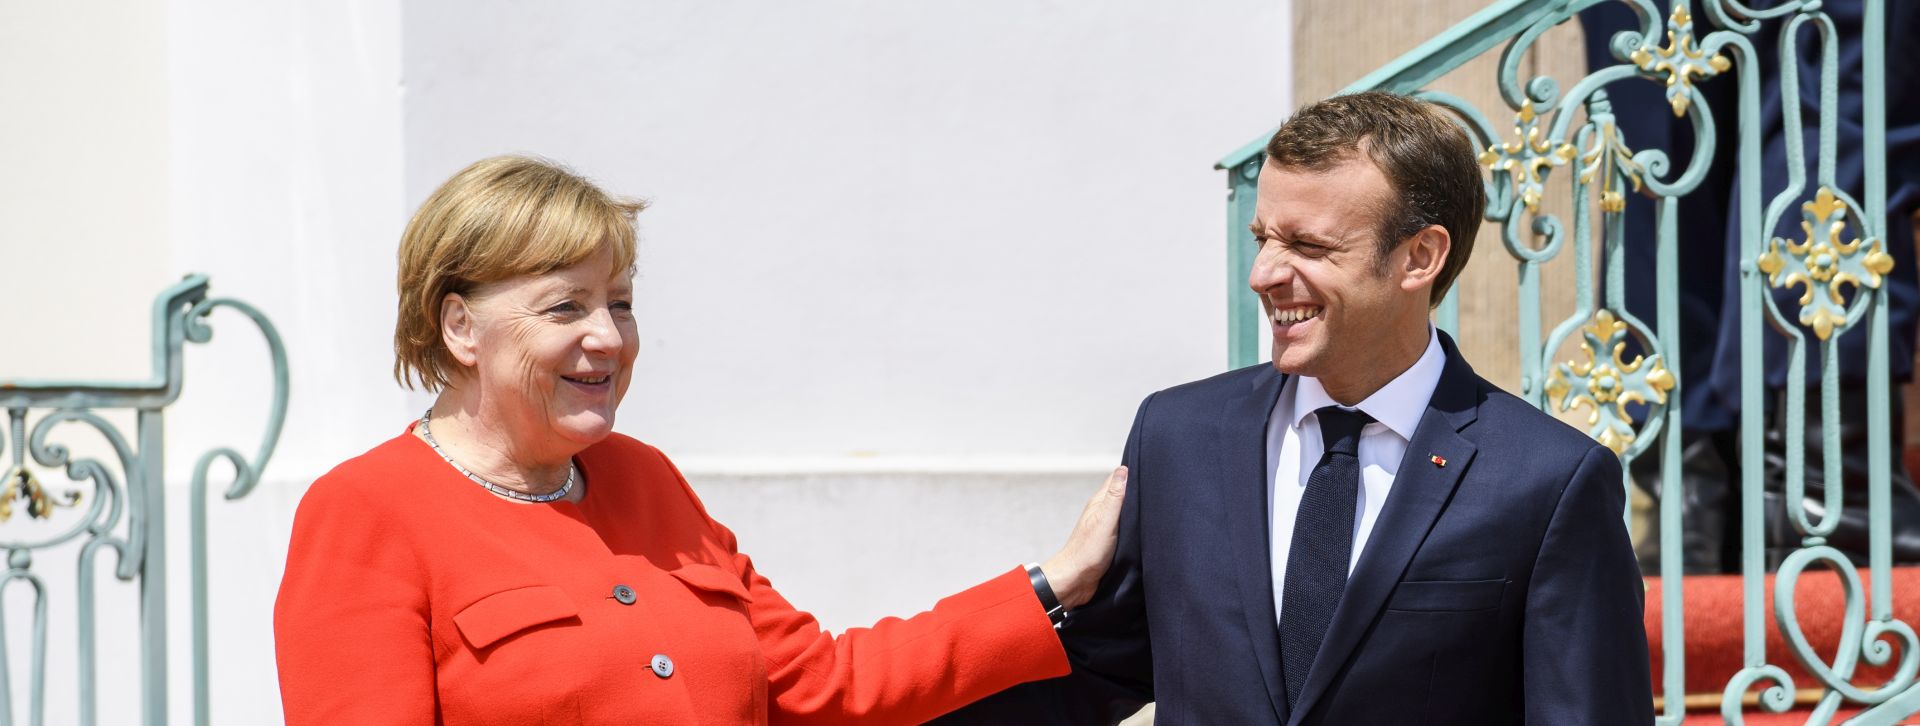 epa06820631 German Chancellor Angela Merkel (L) welcomes French President Emmanuel Macron (R) during the German-French Ministers Meeting in front of the German government's guest house Meseberg Palace, in Meseberg, near Berlin, Germany, 19 June 2018. German and French ministers meet for a one day meeting to discuss bilateral topics, including Foreign, Defence and Security politics.  EPA/CHRISTIAN BRUNA